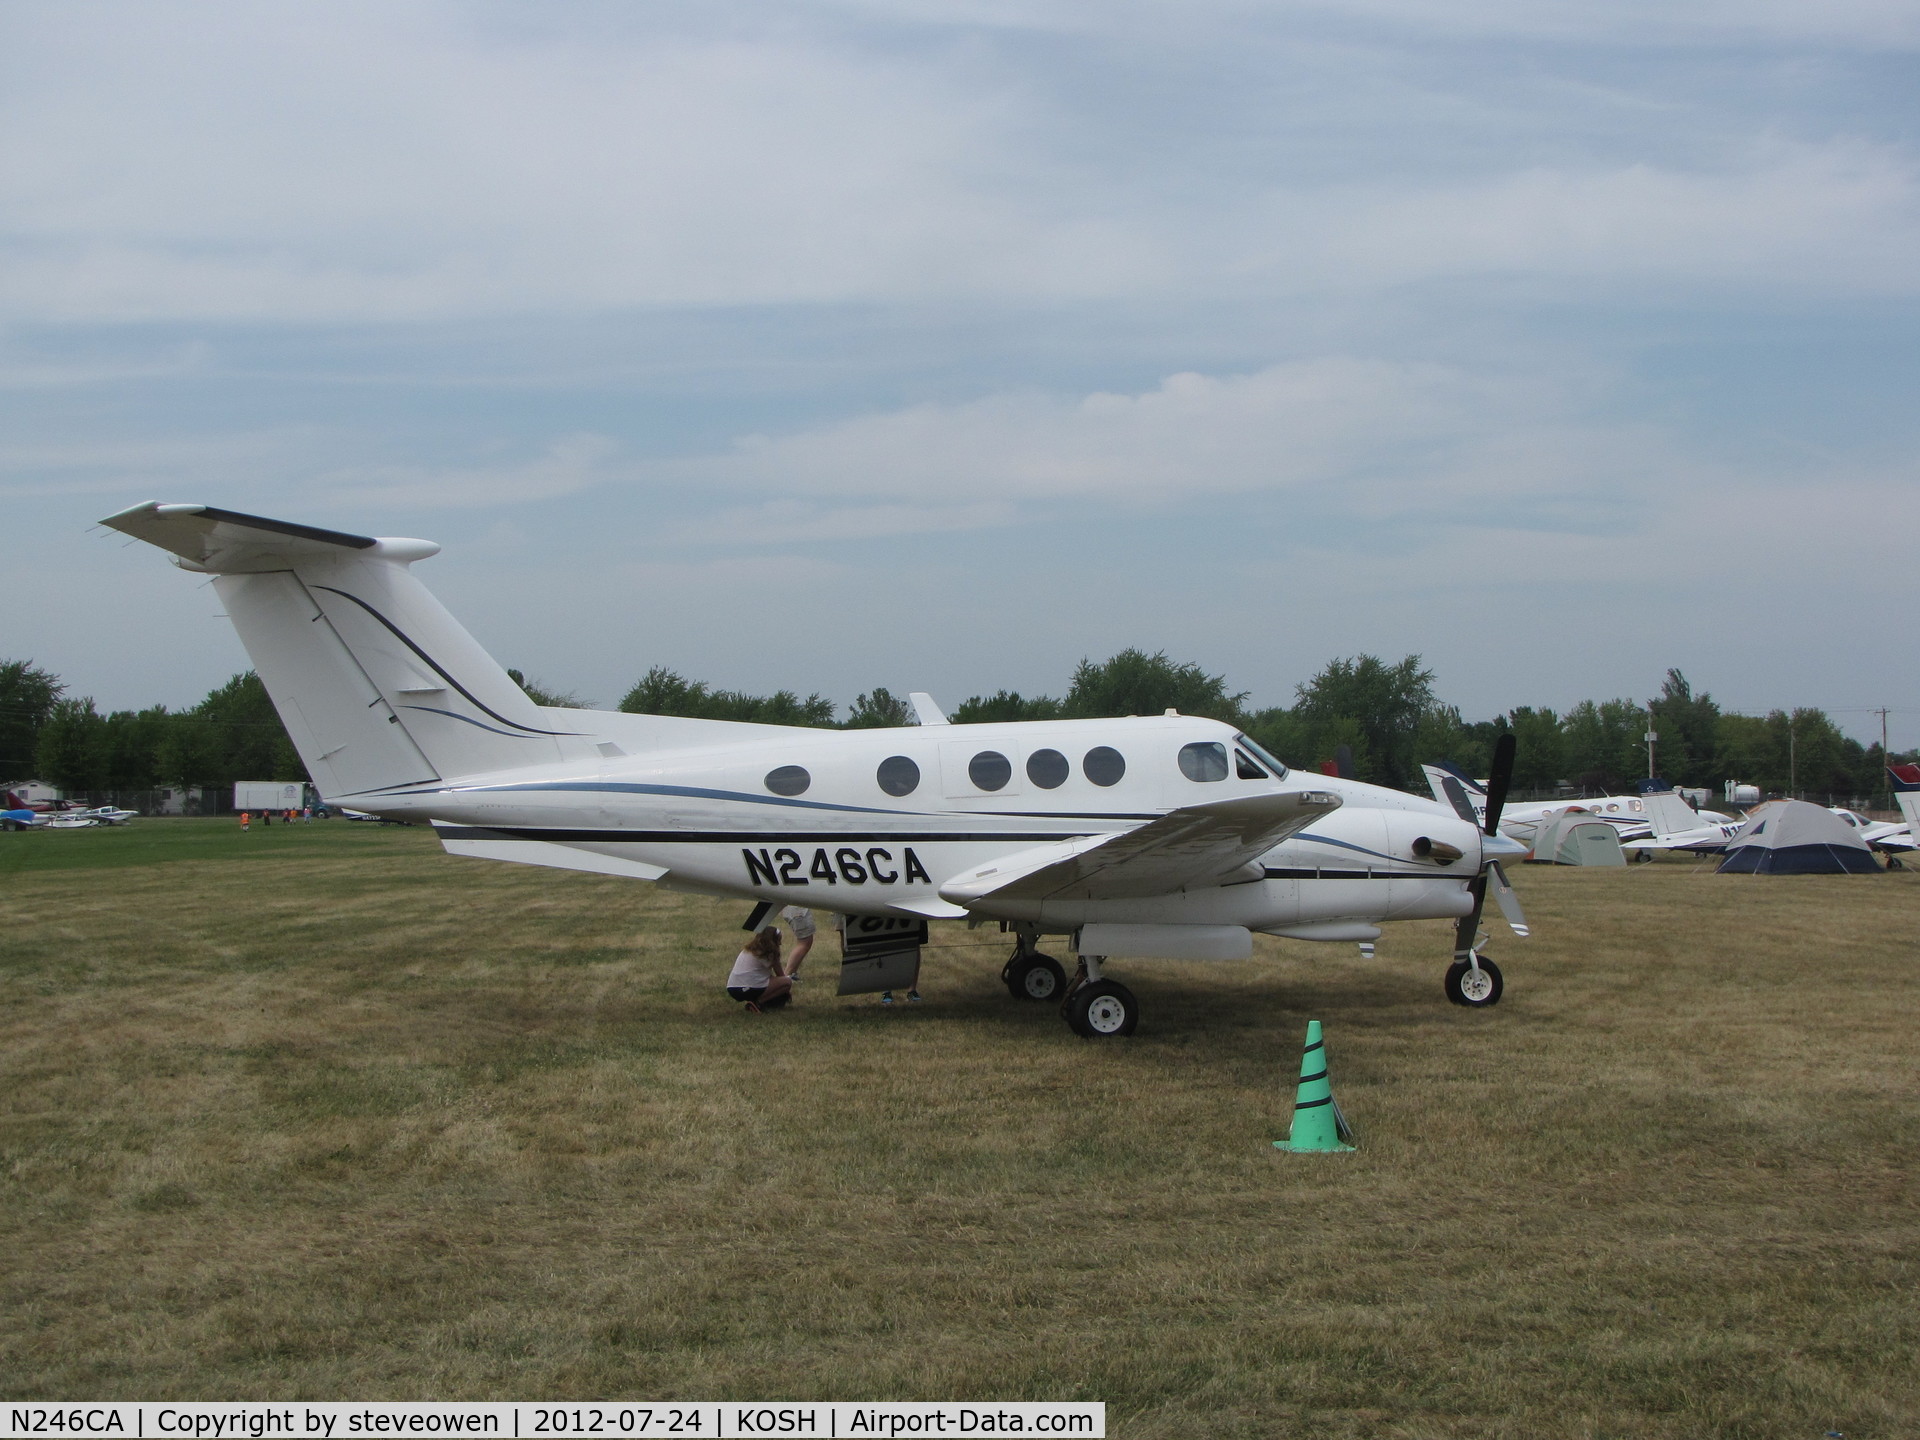 N246CA, 1980 Beech F90 King Air C/N LA-27, in the camp grounds EAA2012